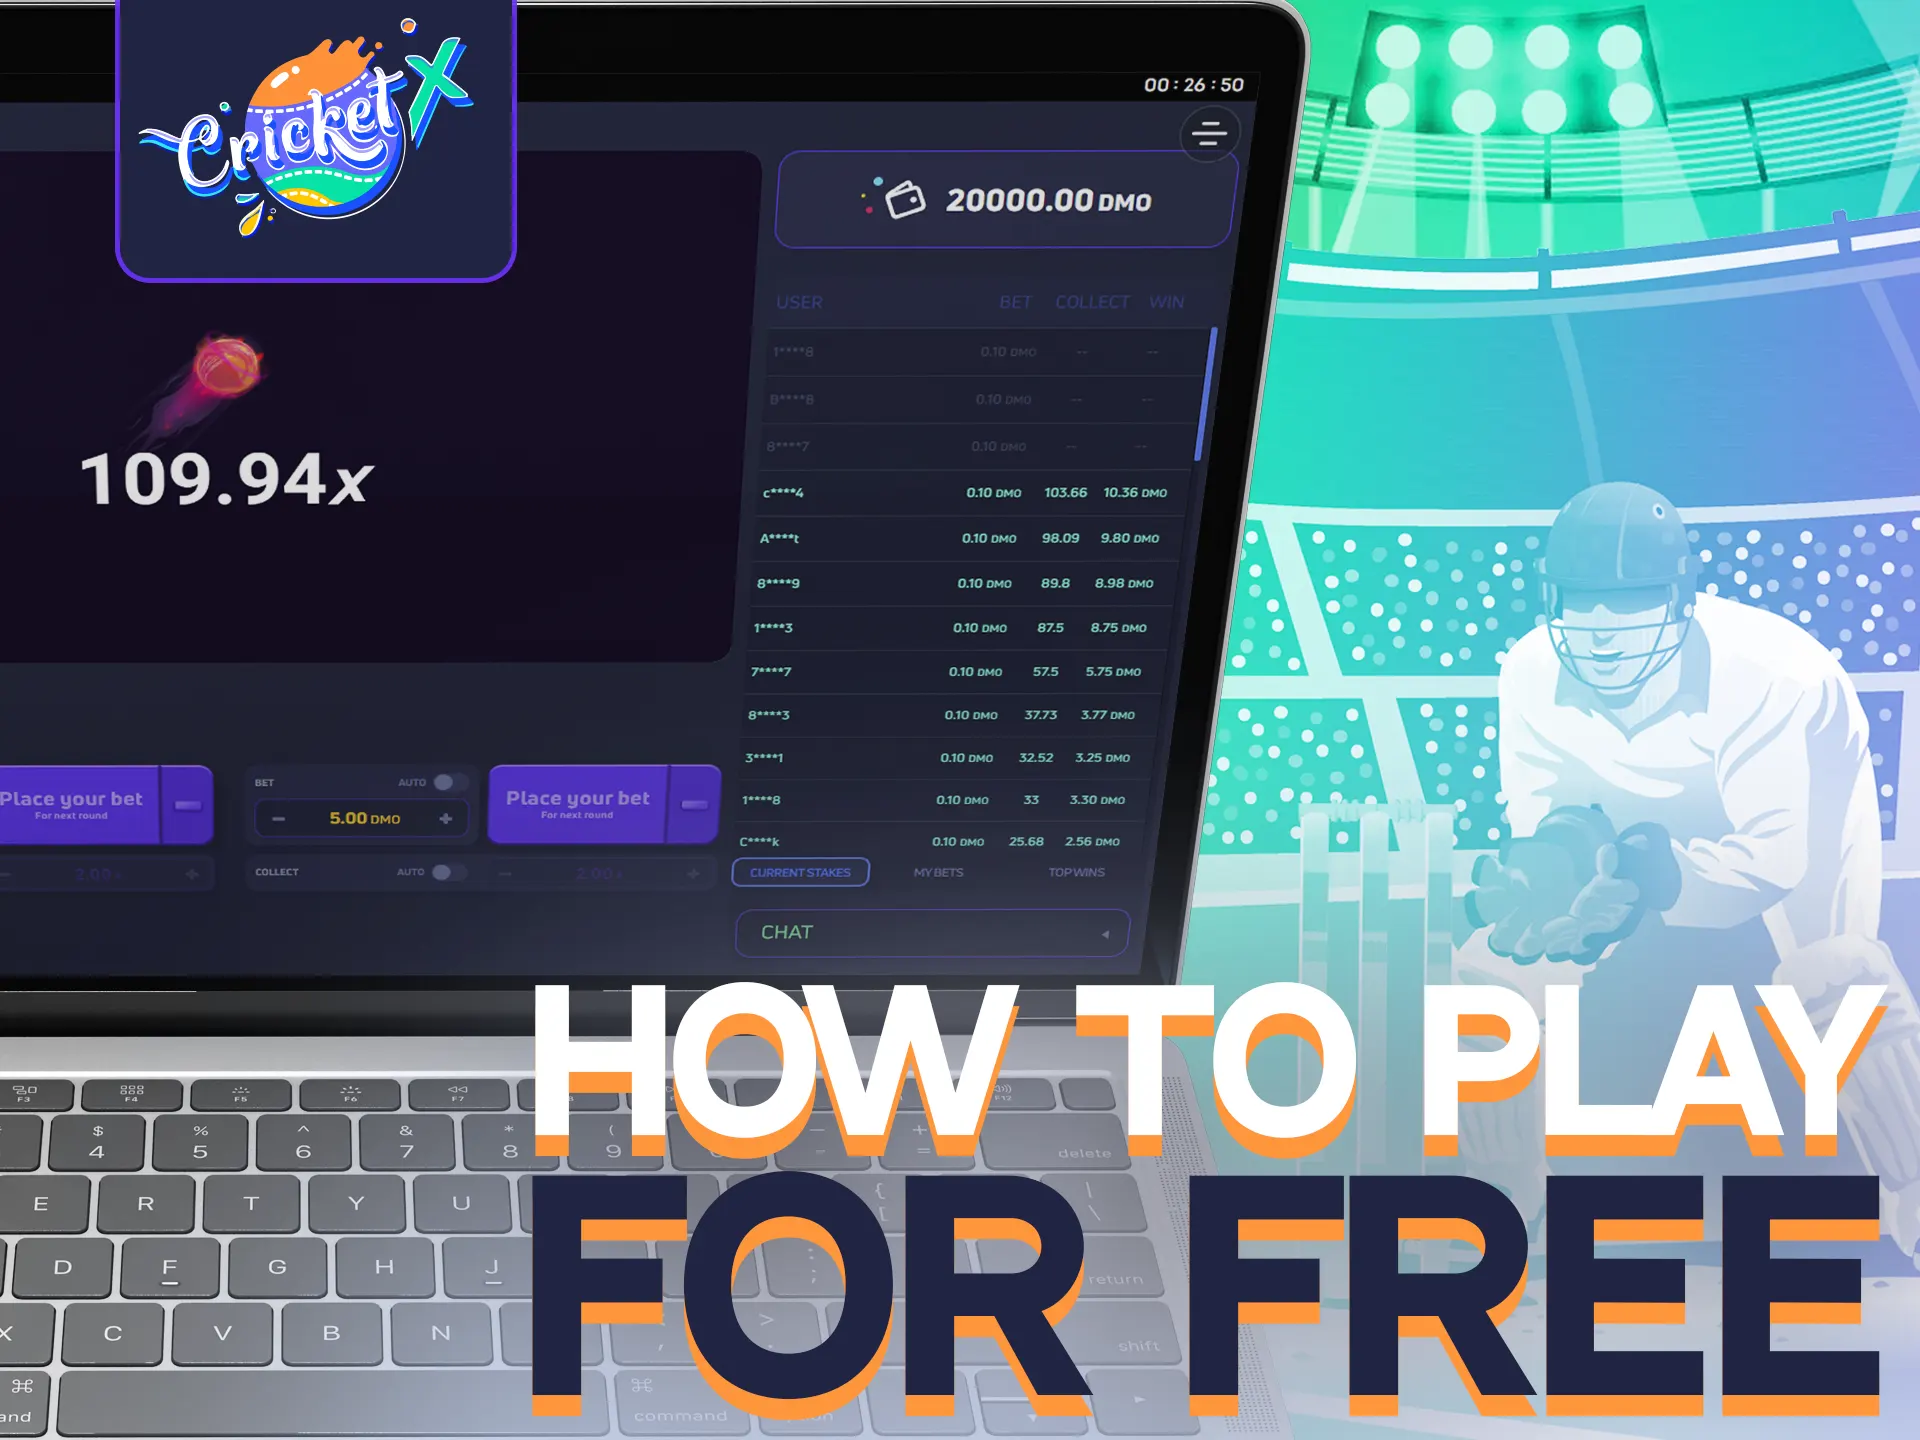 You can play for free using the demo game of Cricket-X.